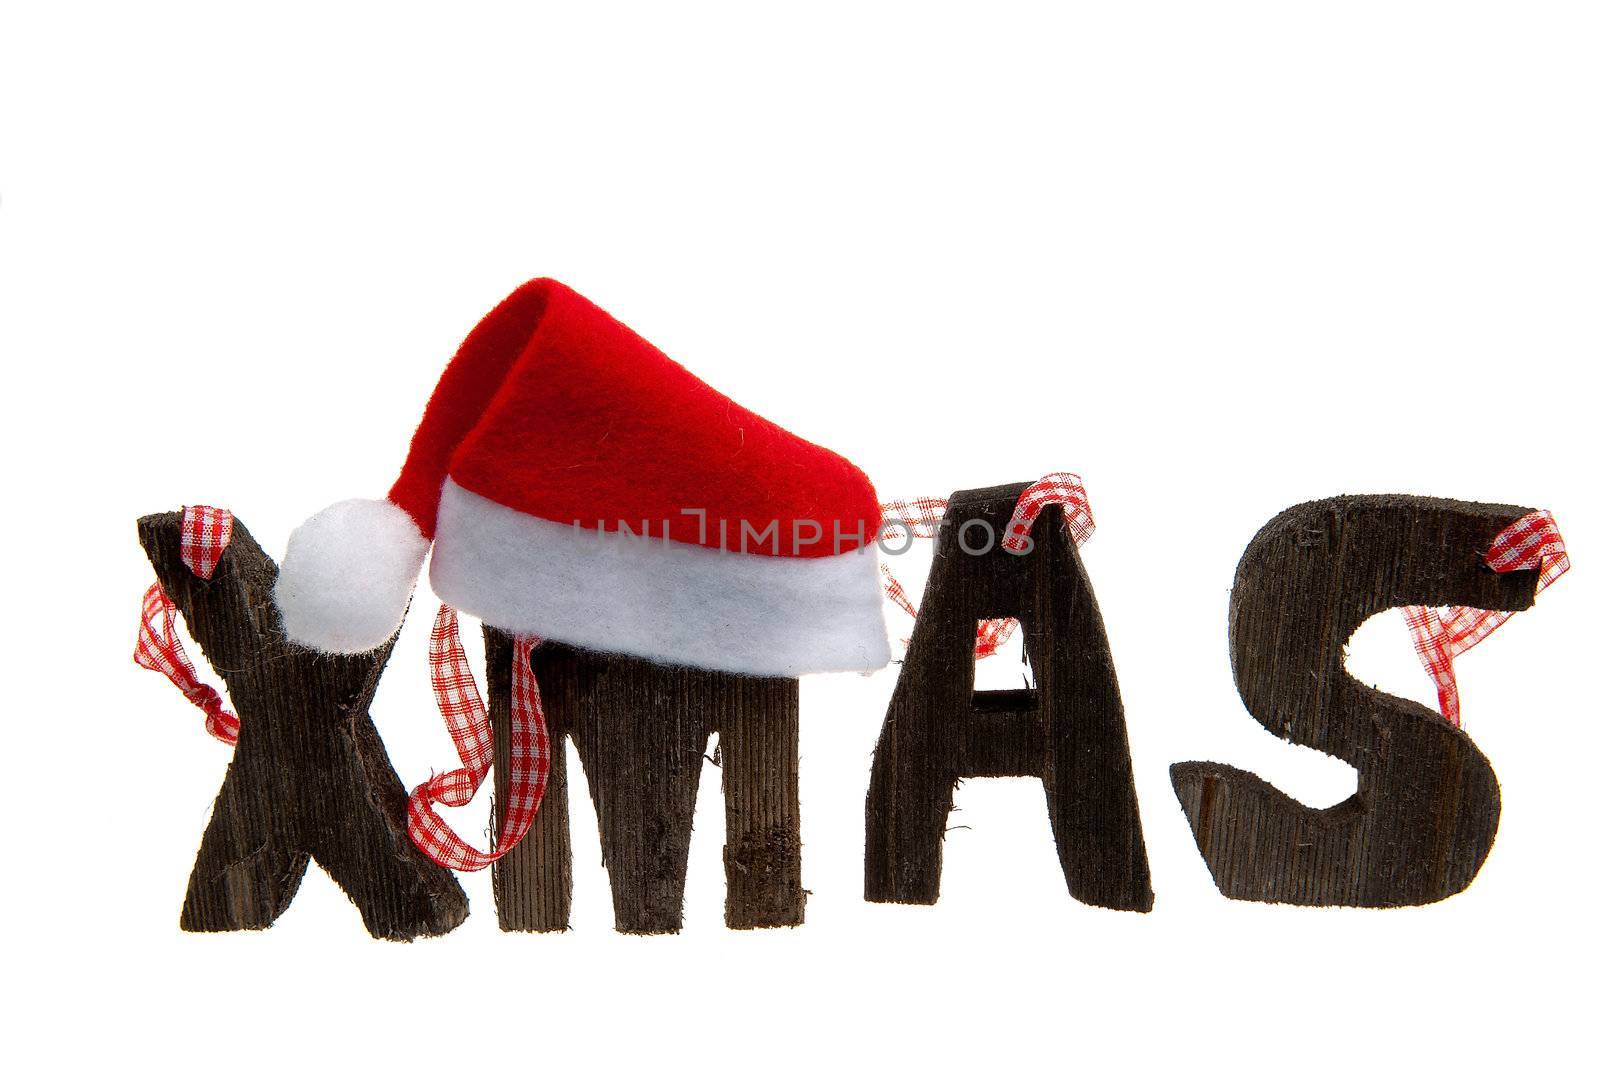 wooden word "xmas" with a hat